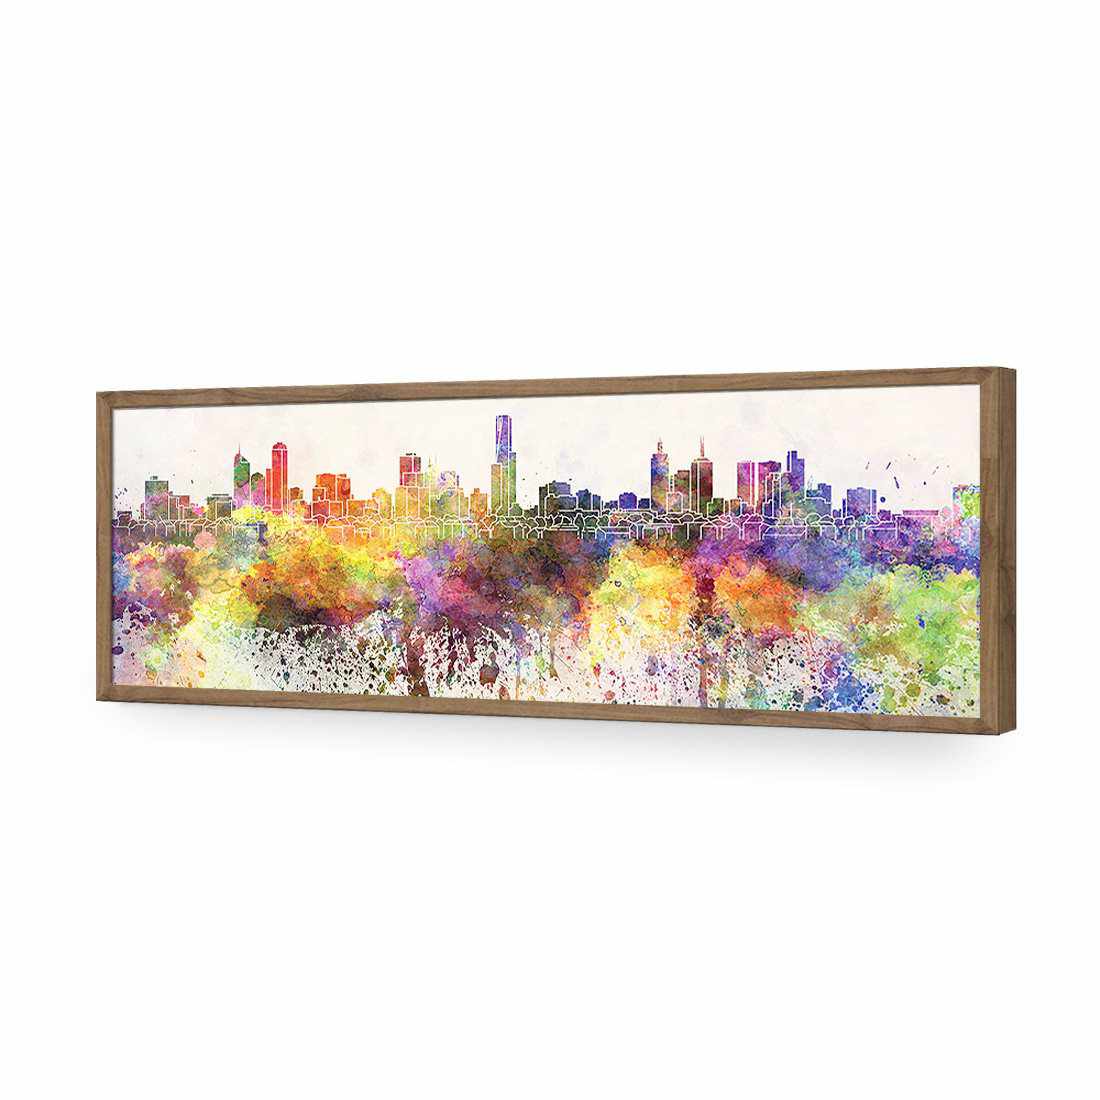 Melbourne Skyline Watercolour, Long-Acrylic-Wall Art Design-Without Border-Acrylic - Natural Frame-60x20cm-Wall Art Designs